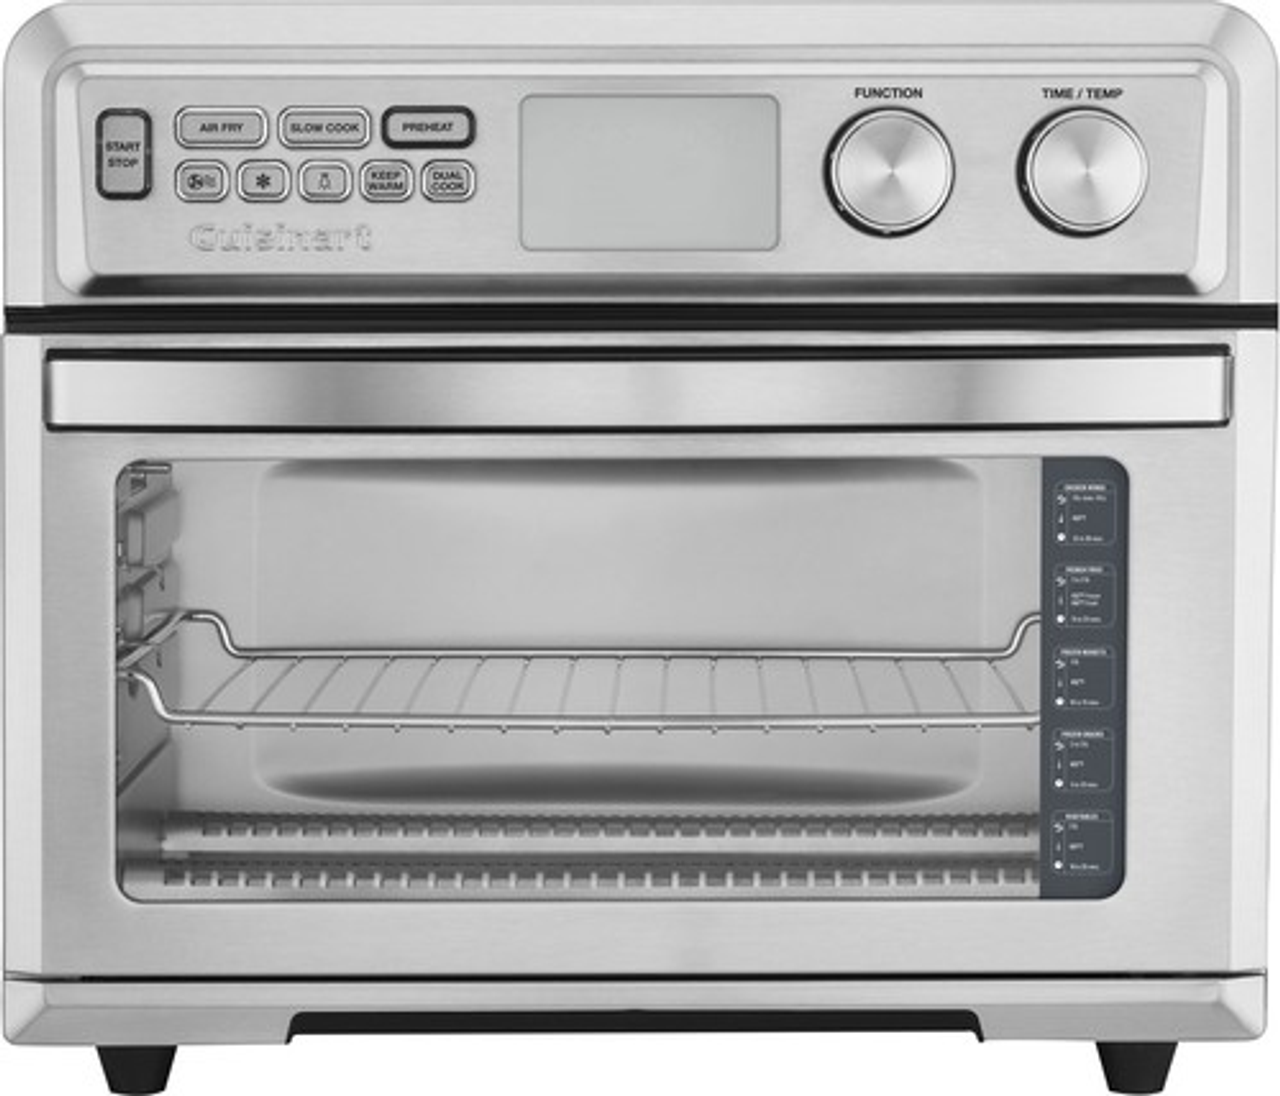 Cuisinart - Large Digital Airfryer Toaster Oven - Stainless Steel